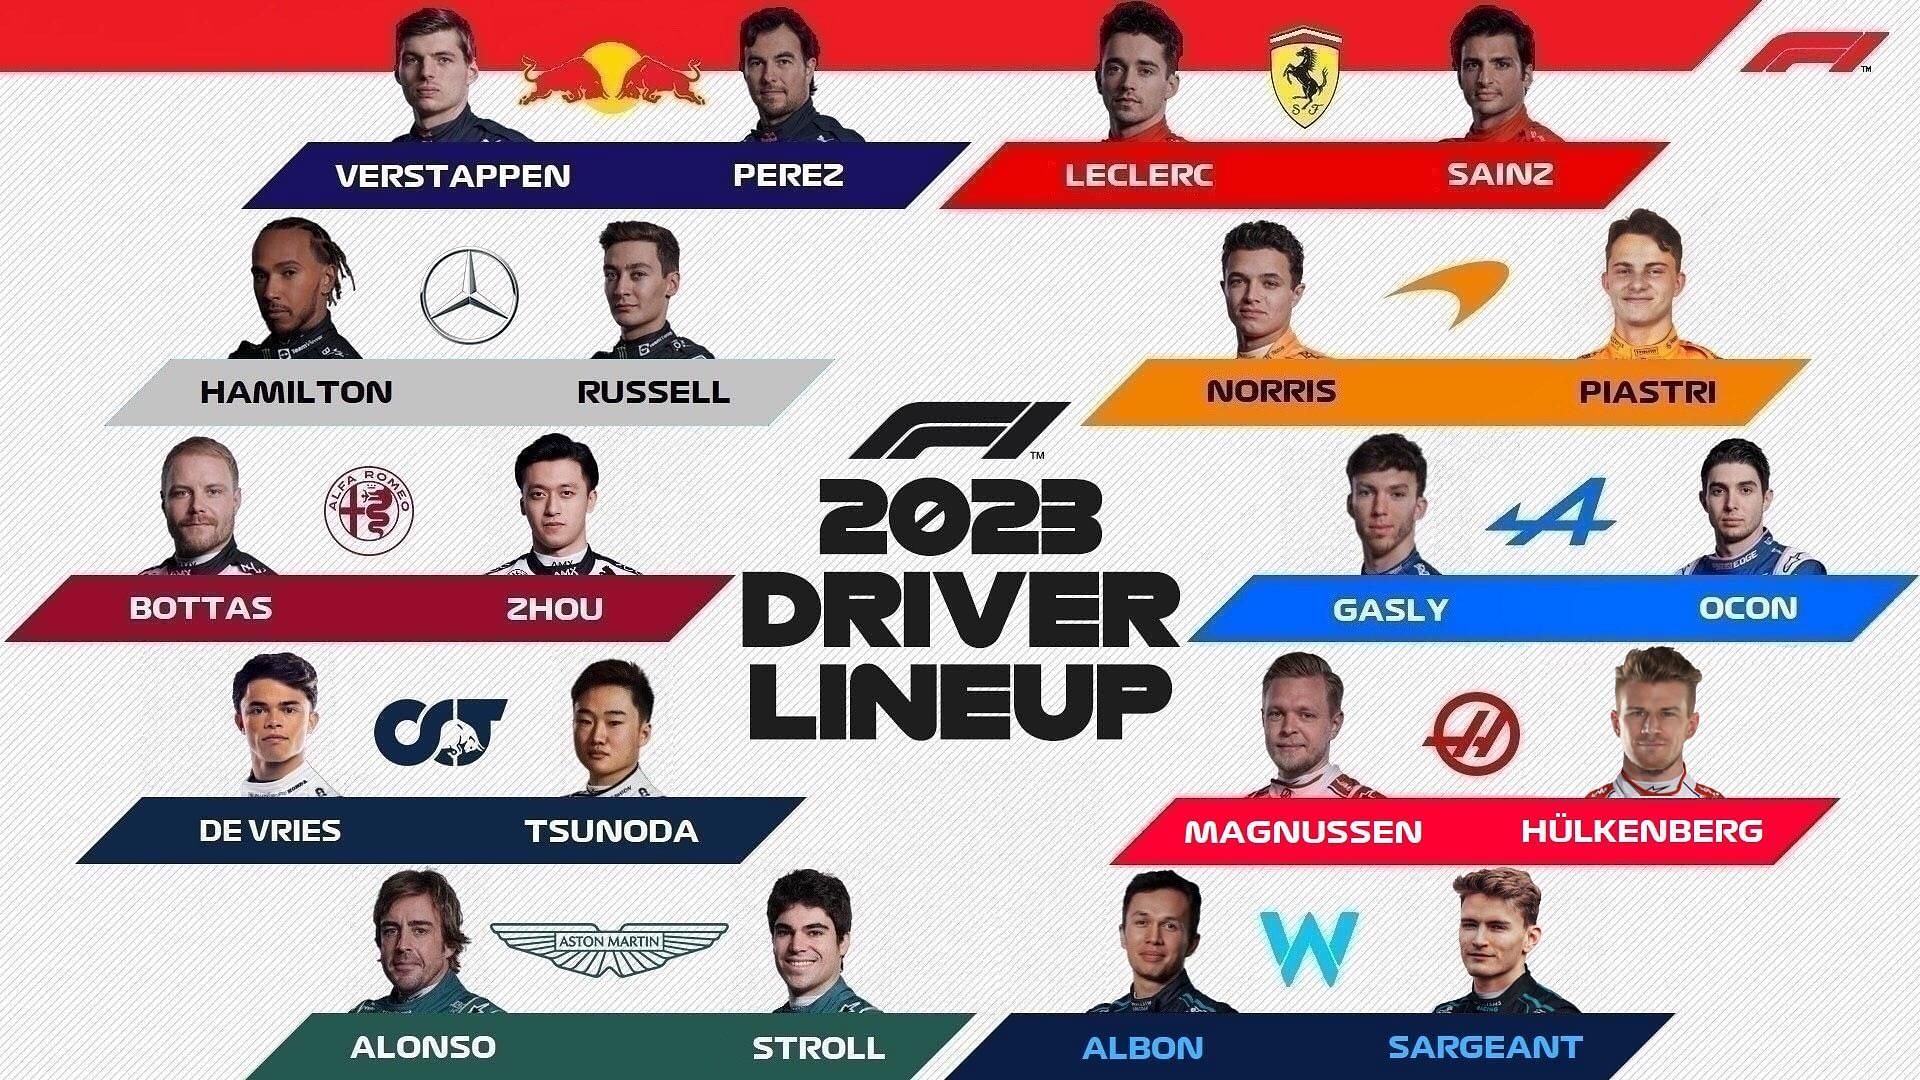 Beginner's guide to Formula 1, see F1 2023 season teams, drivers and more -  BusinessToday